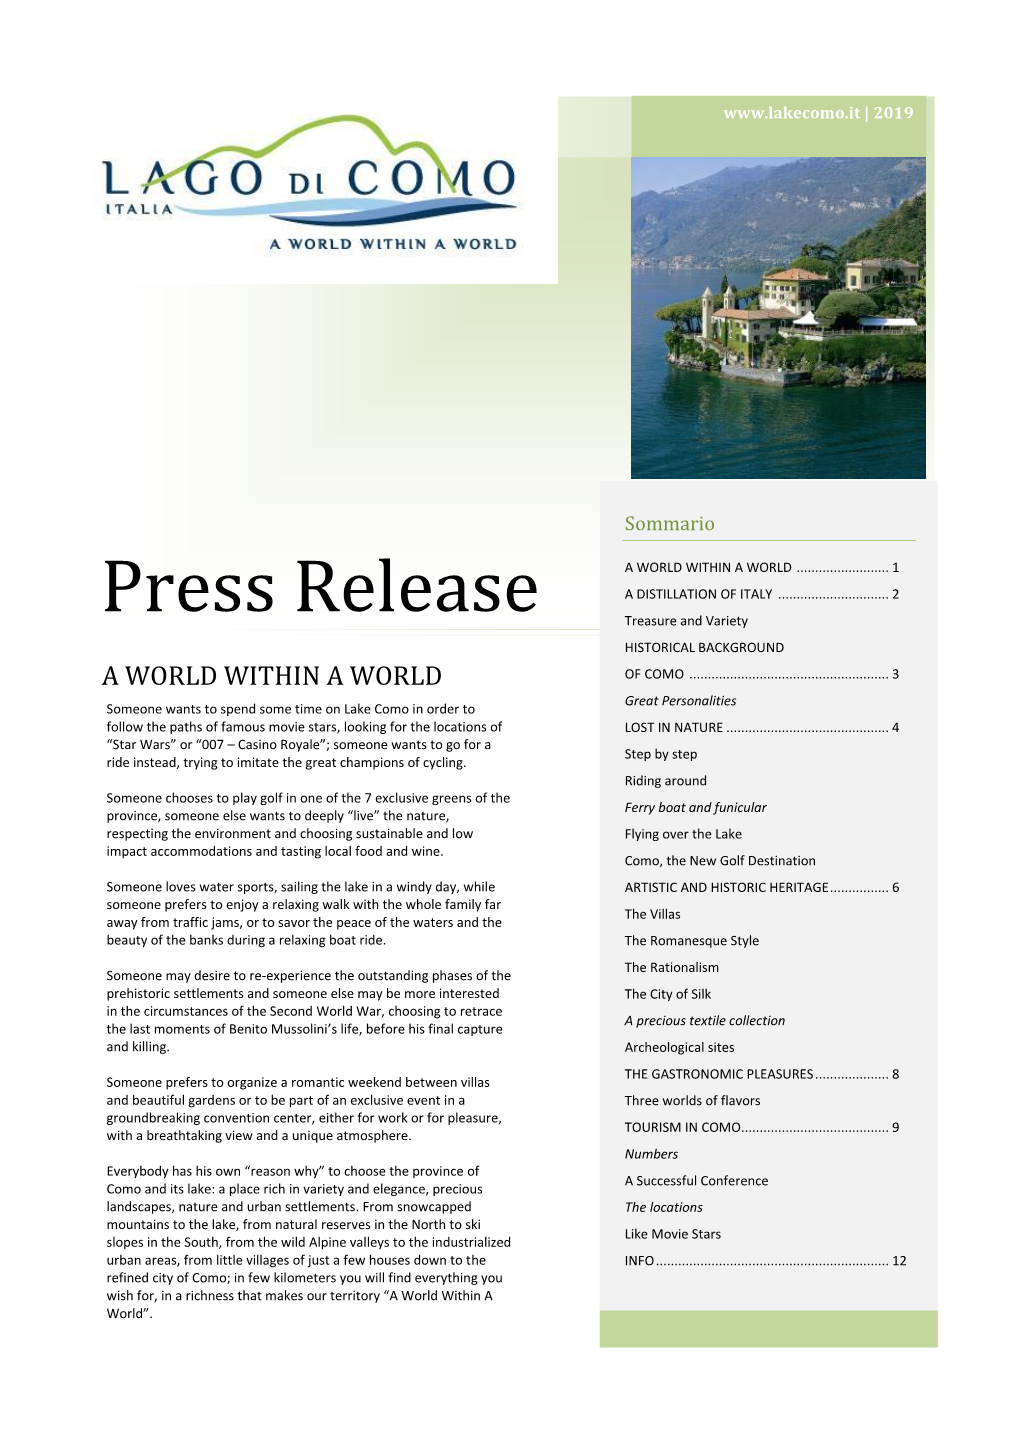 Press Release a DISTILLATION of ITALY